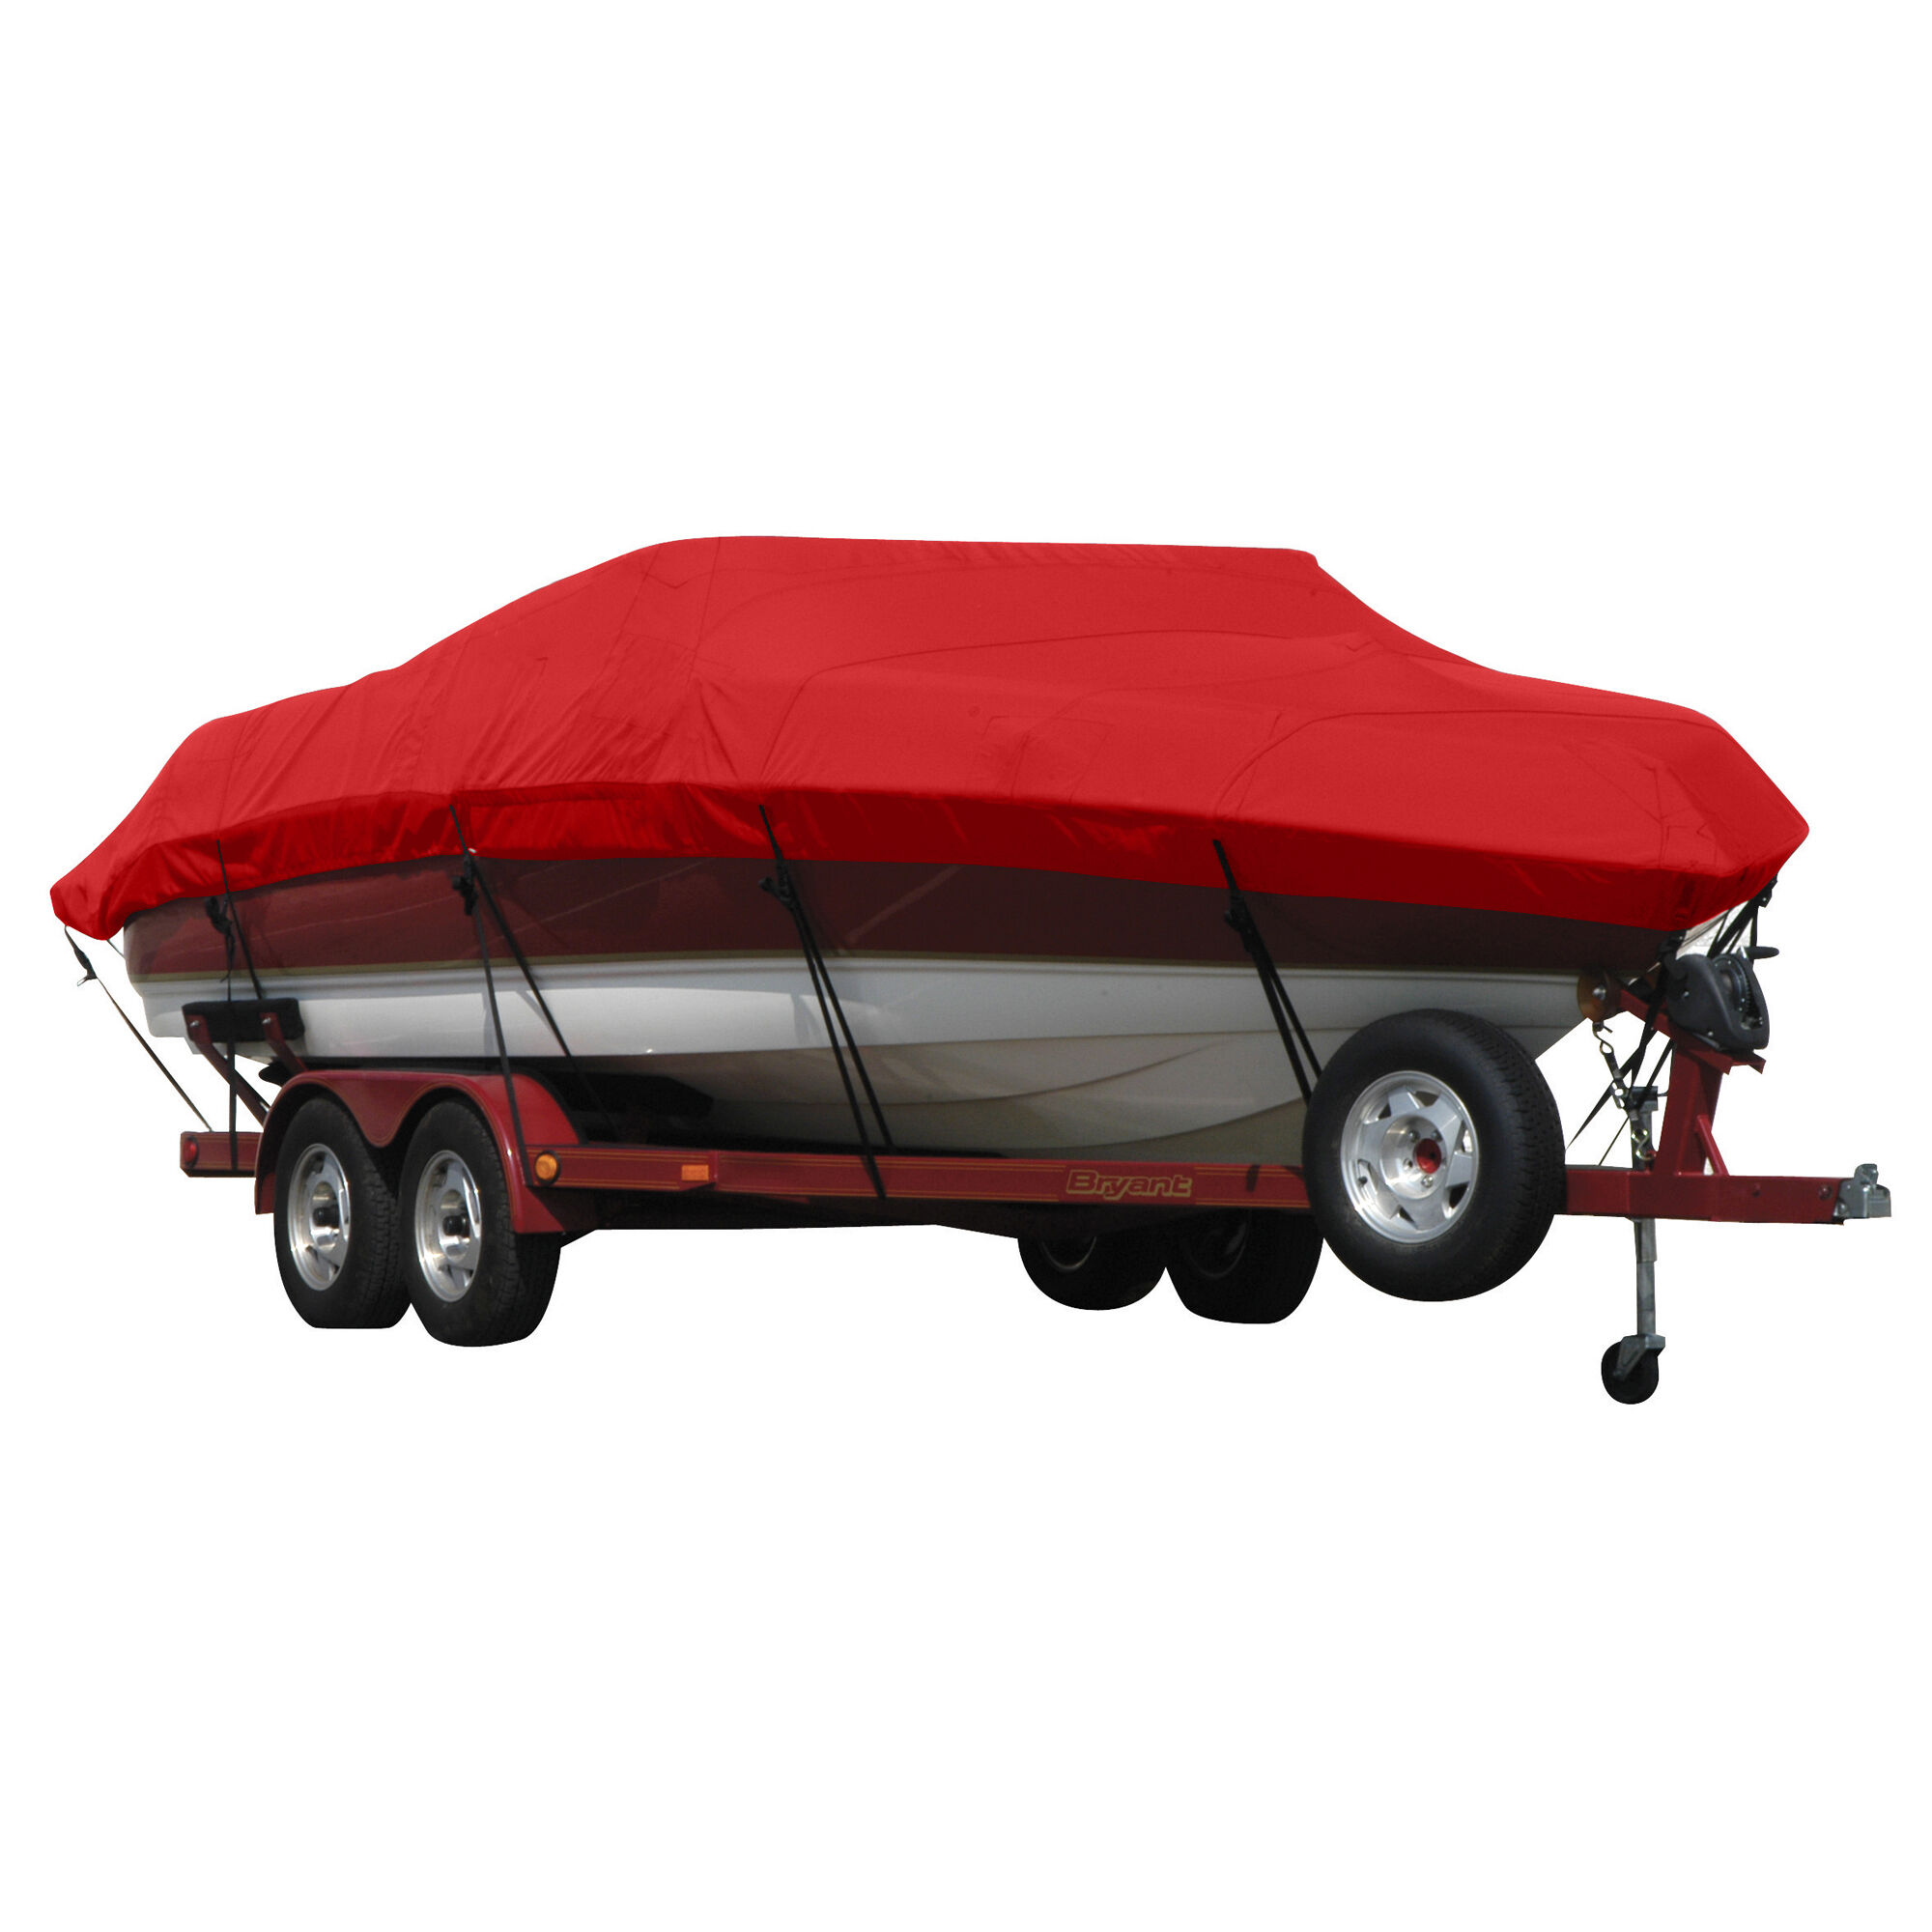 Covermate Exact Fit Sunbrella Boat Cover for Glastron 19 Css 19 Css w/ Wing I/O. Jockey Red Acrylic